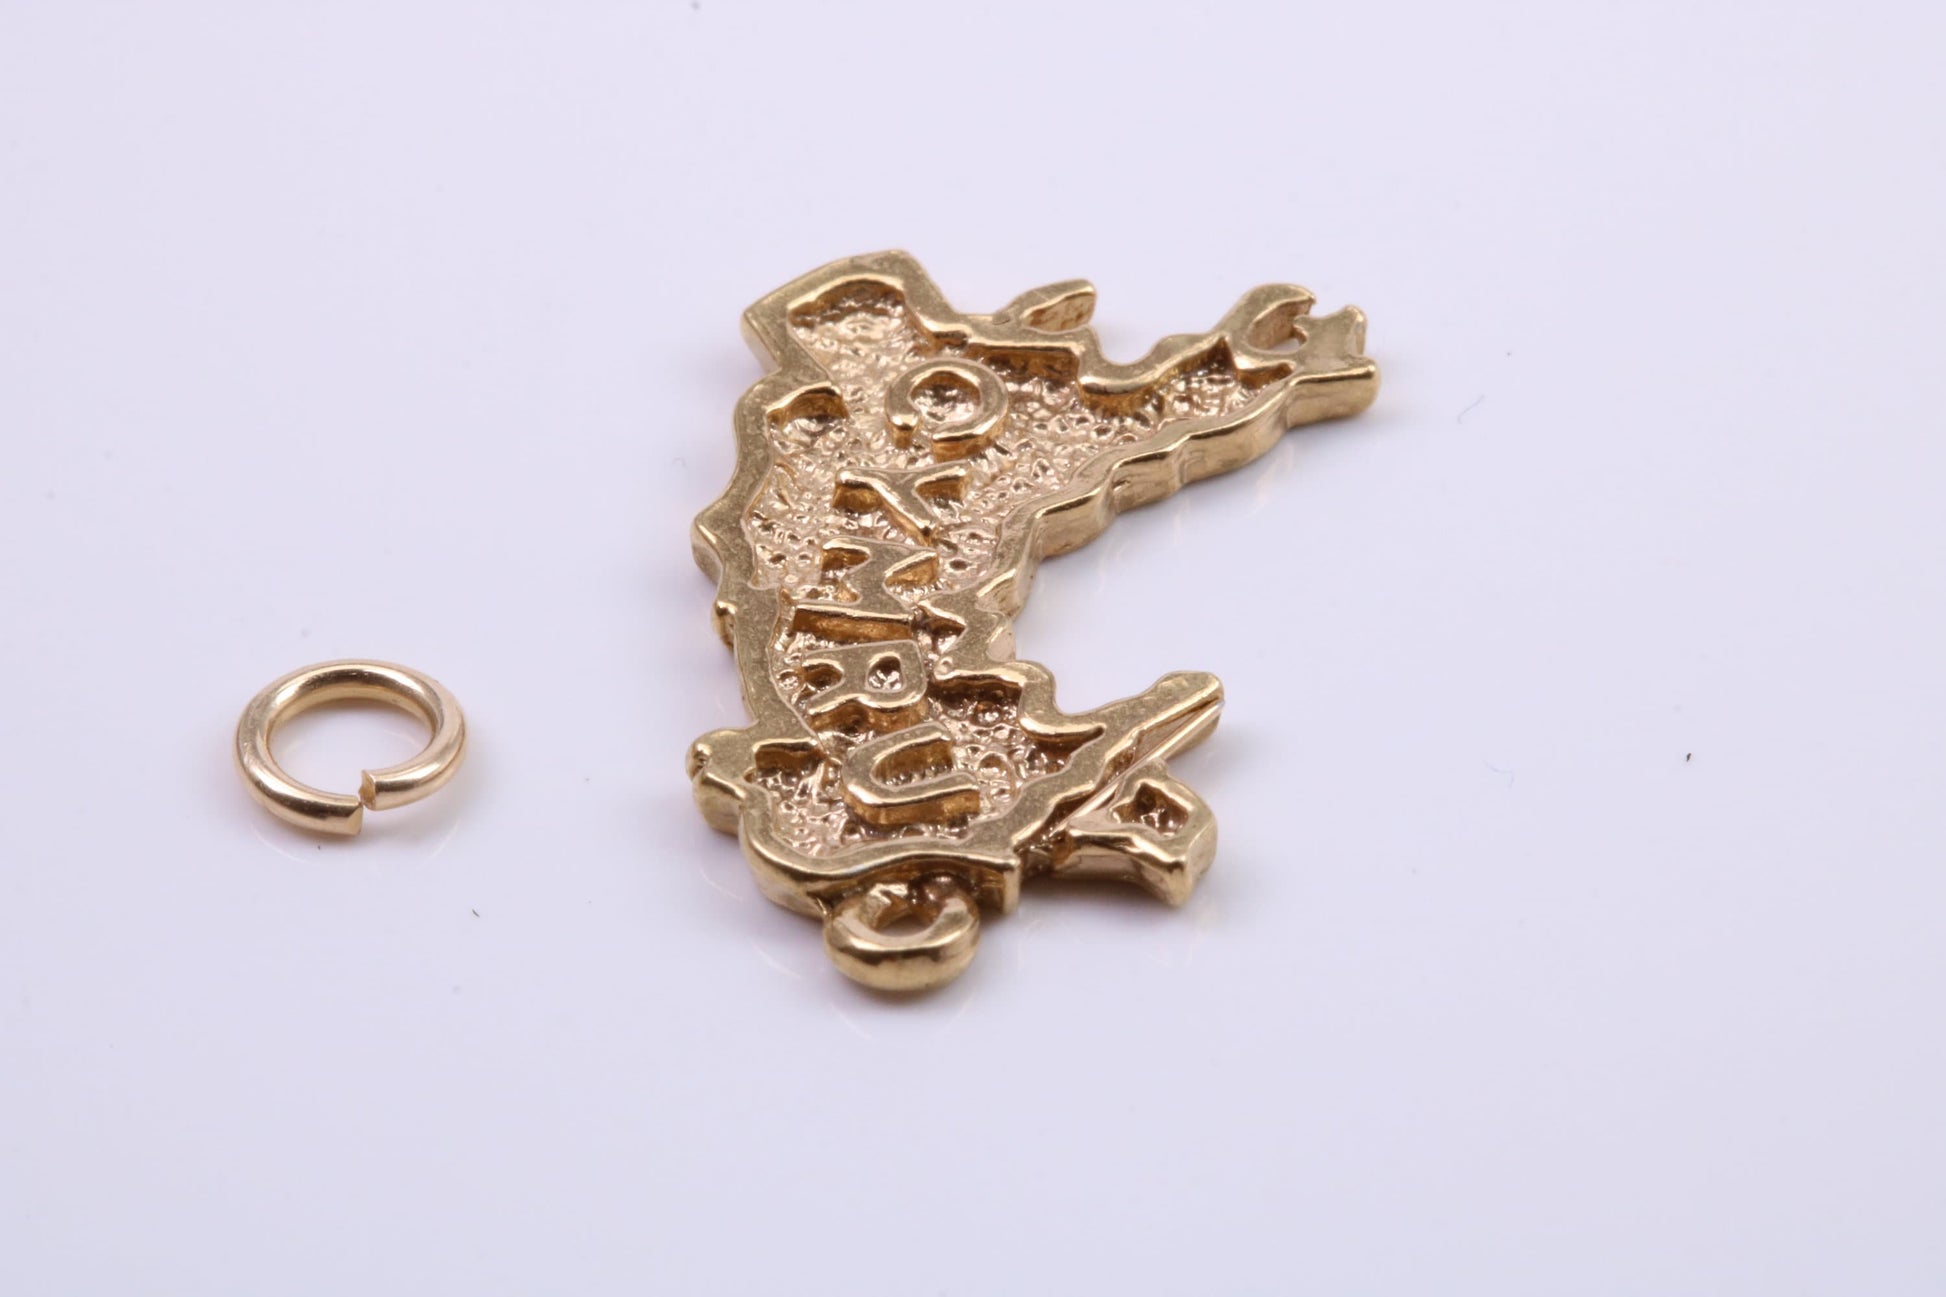 Map of Cymru Charm, Traditional Charm, Made from Solid 9ct Yellow Gold, British Hallmarked, Complete with Attachment Link